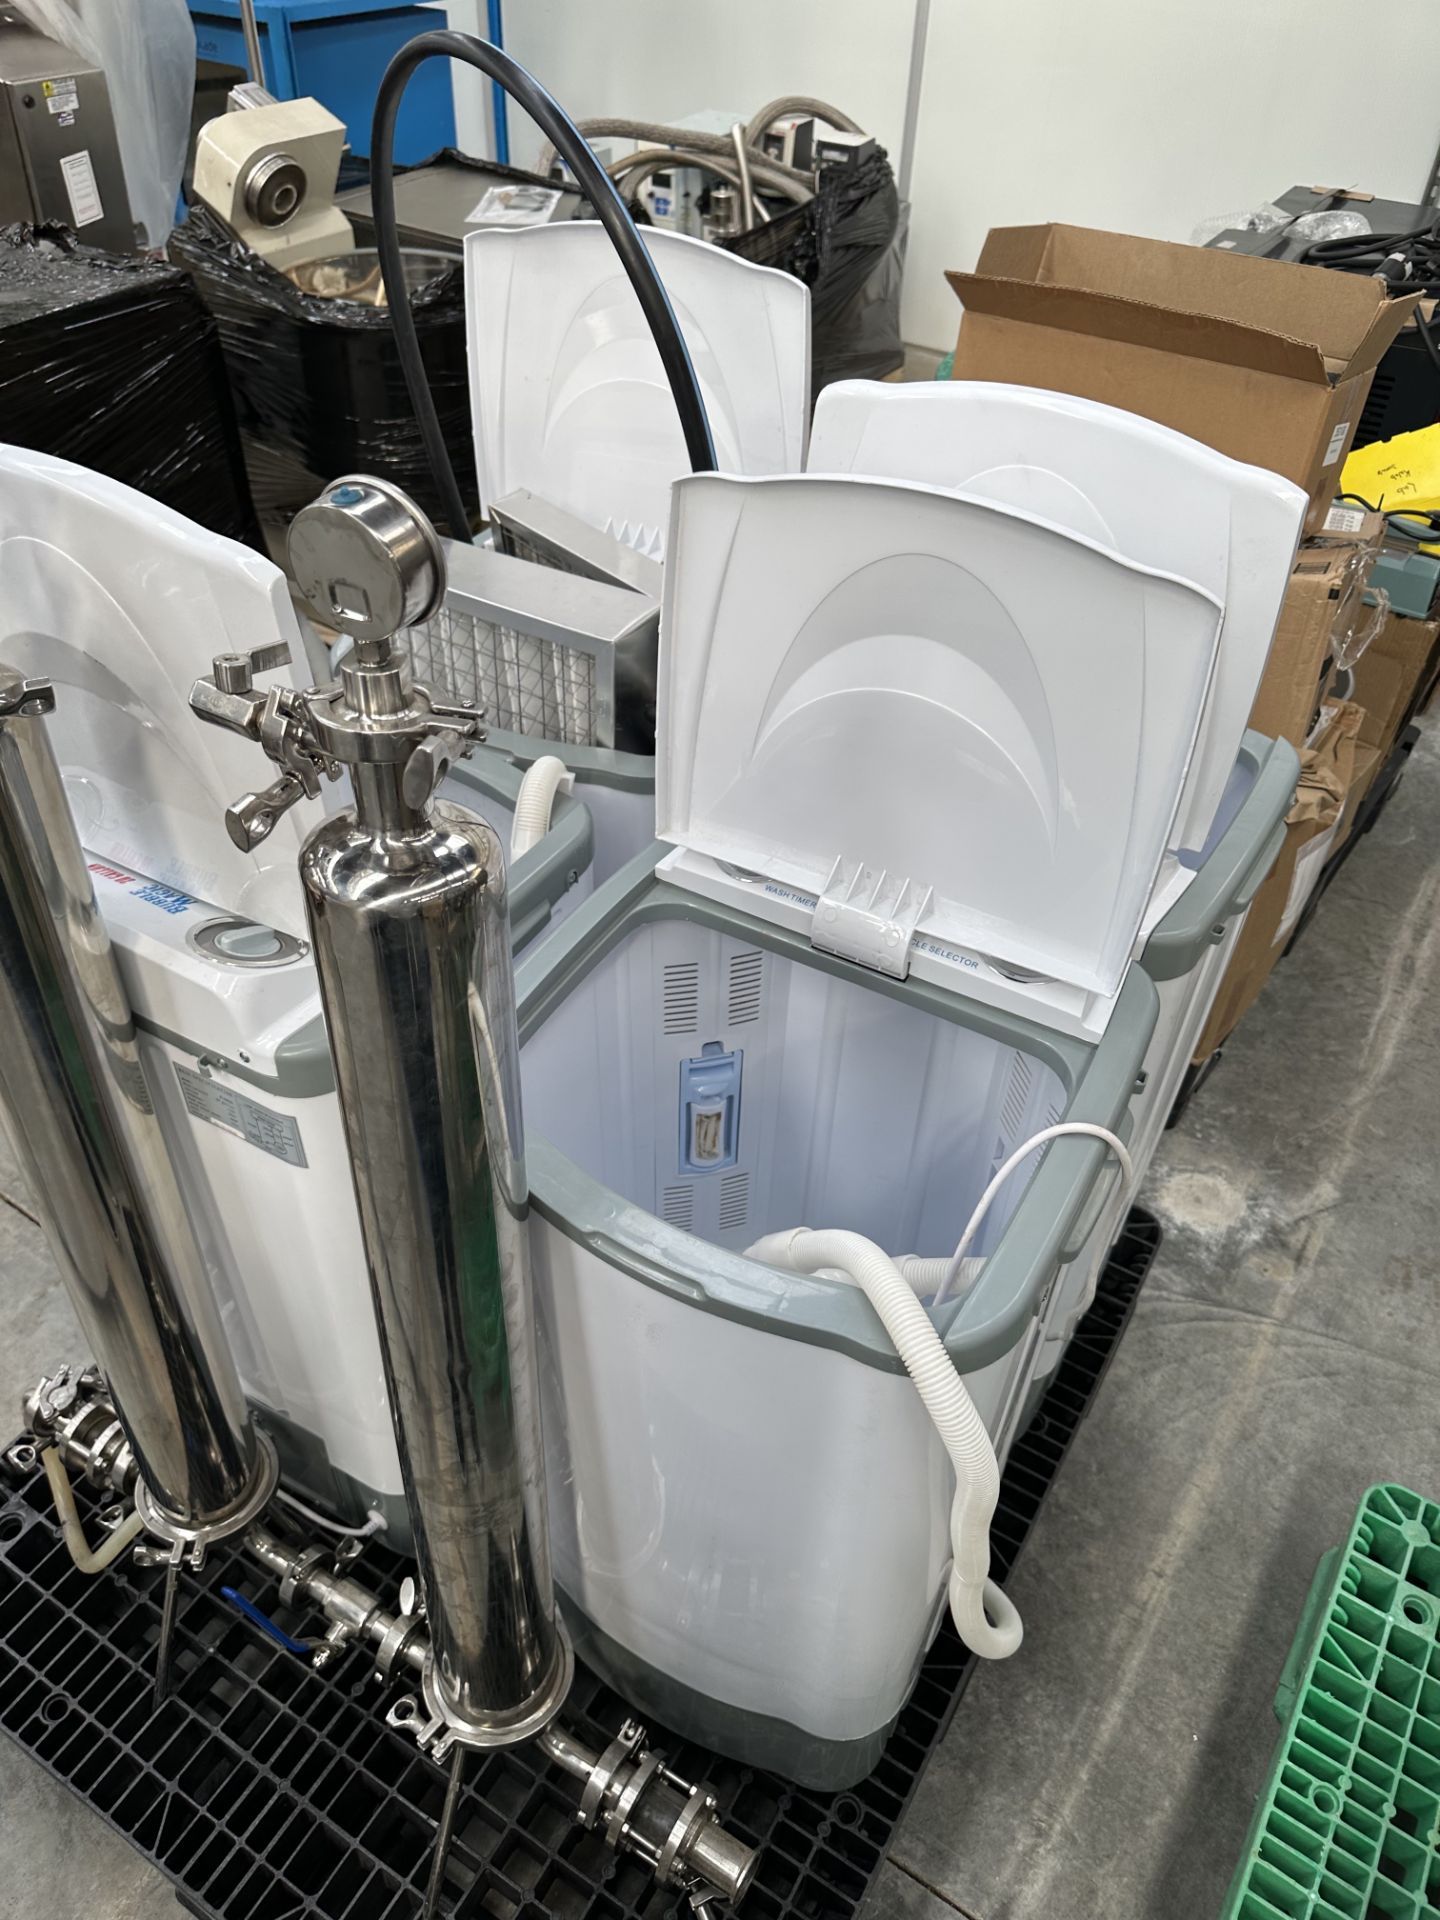 Lot of (4) New Bubble Magic 20 Gallon Extraction Washing Machines & (4) Used Units. Alll Model BML20 - Image 4 of 6